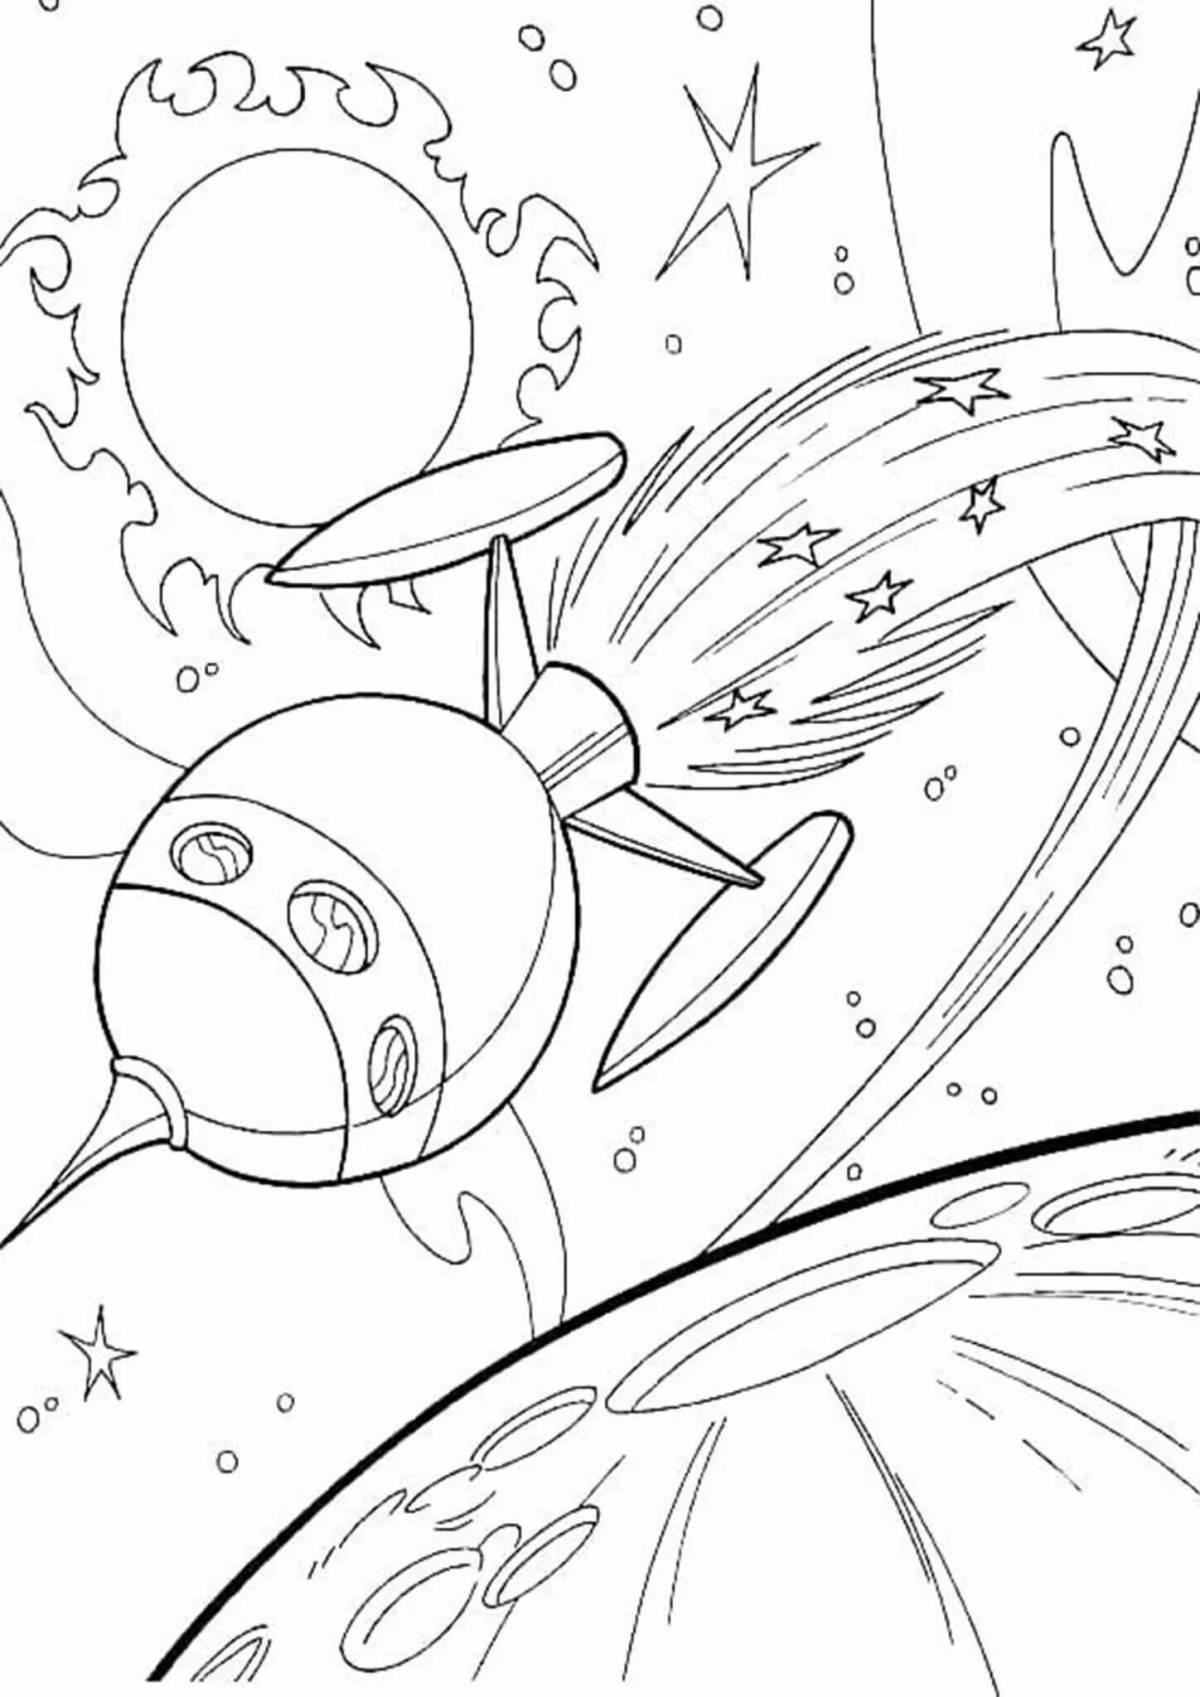 Fun space coloring book for kids